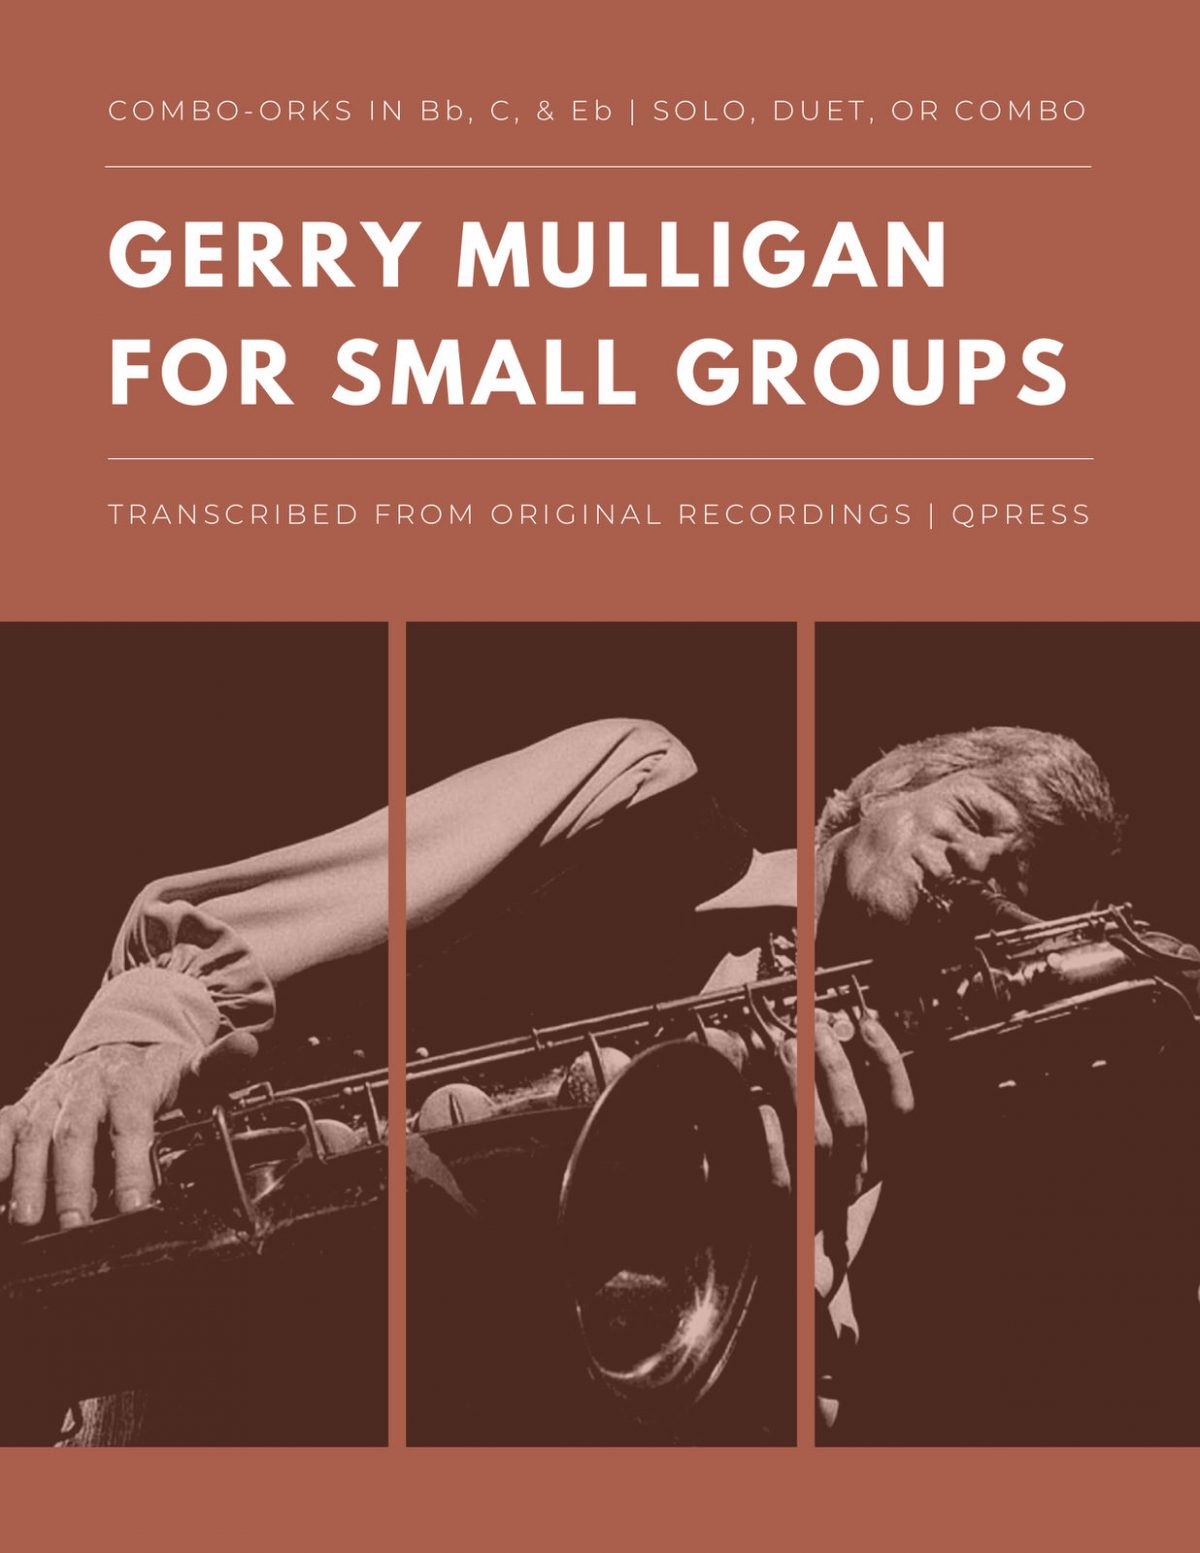 Gerry Mulligan for Small Groups (Combo-Orks)